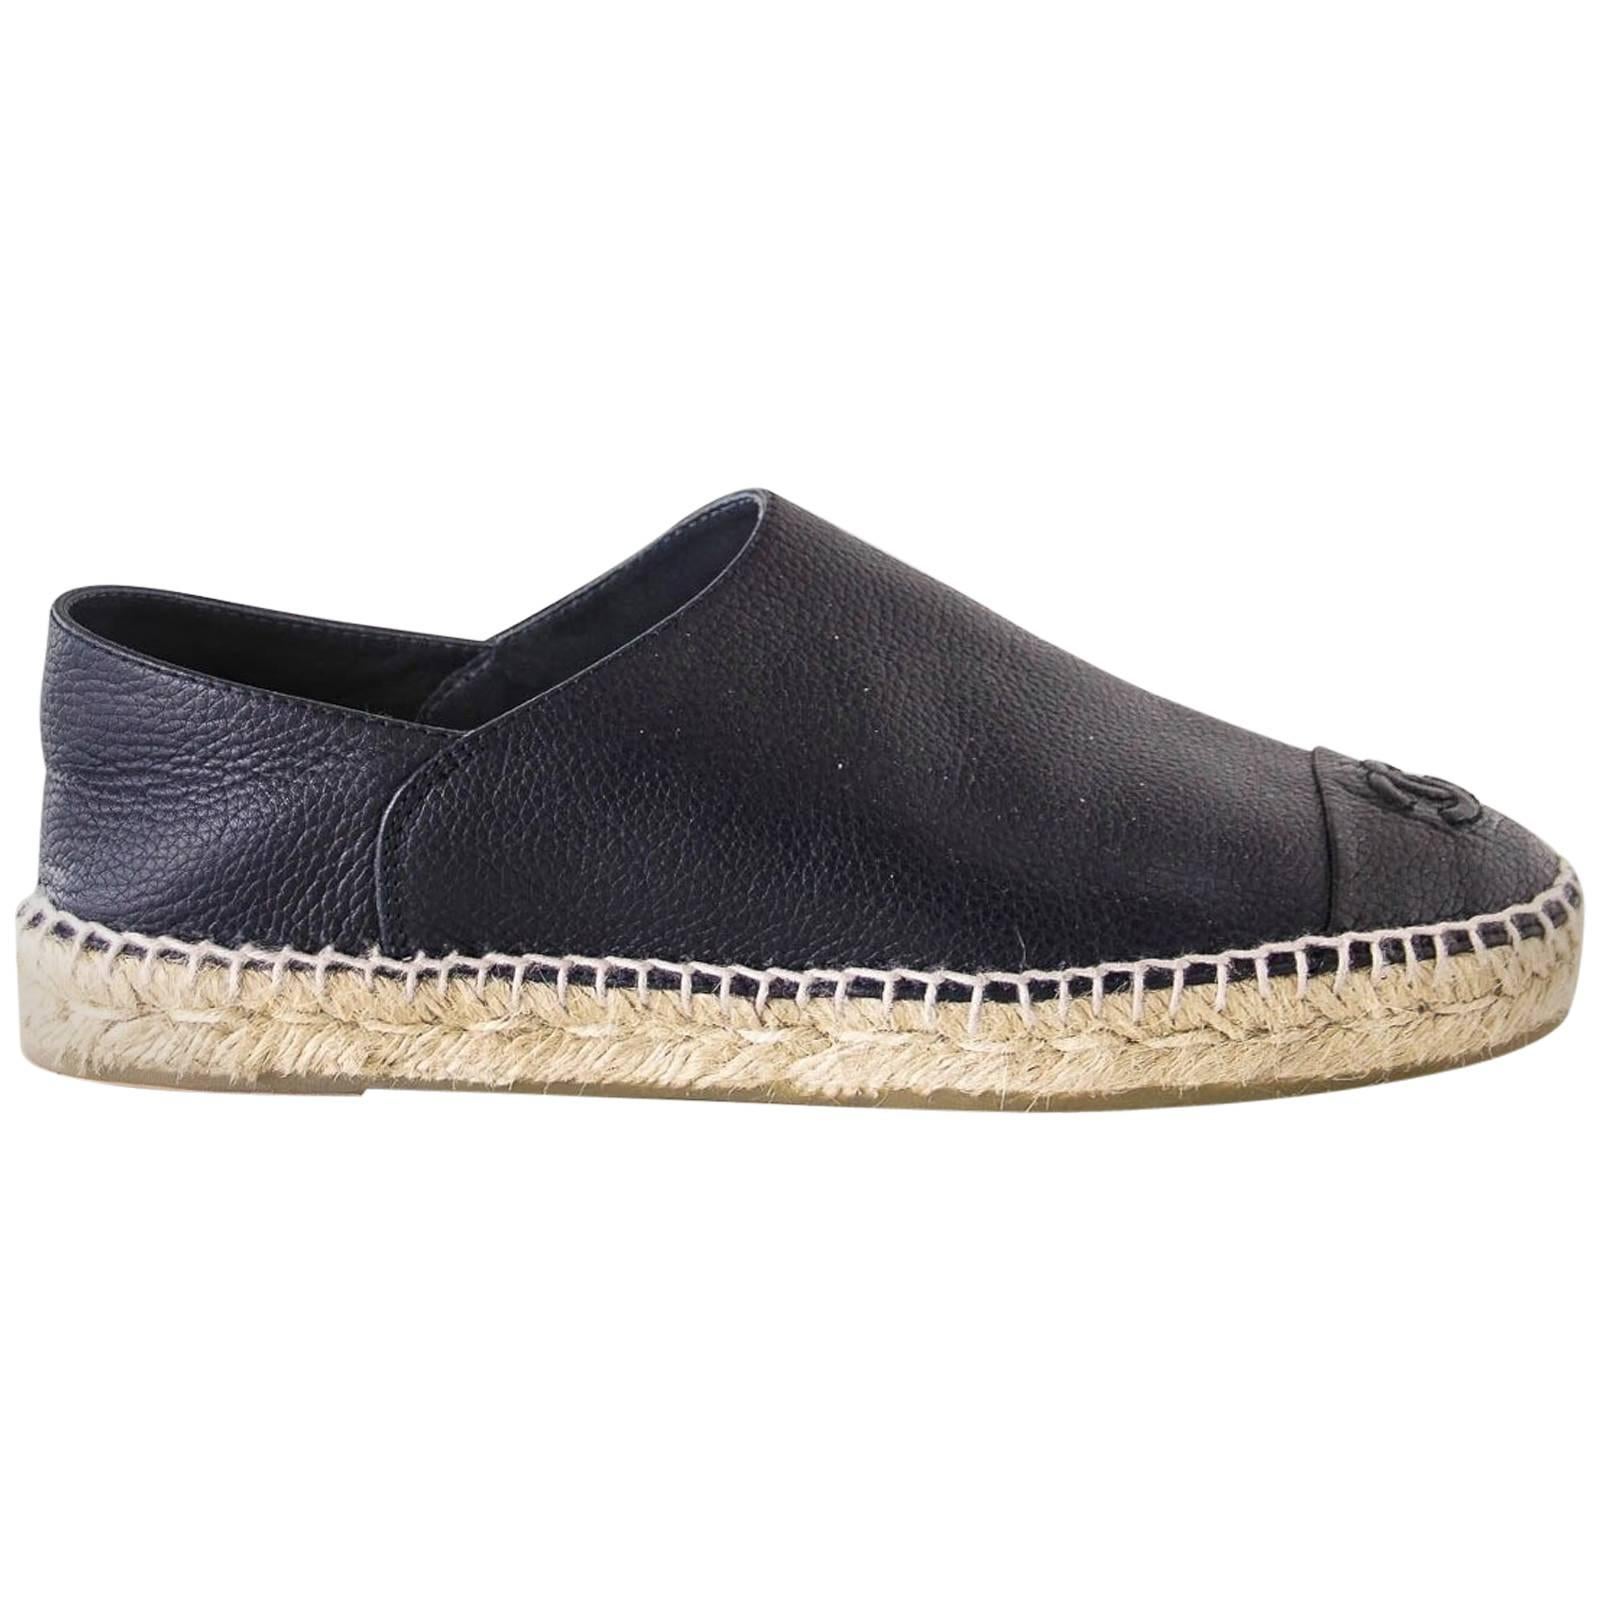 Chanel Shoe Espadrilles Cambon Loafers Dark Navy Leather 39 / 9  